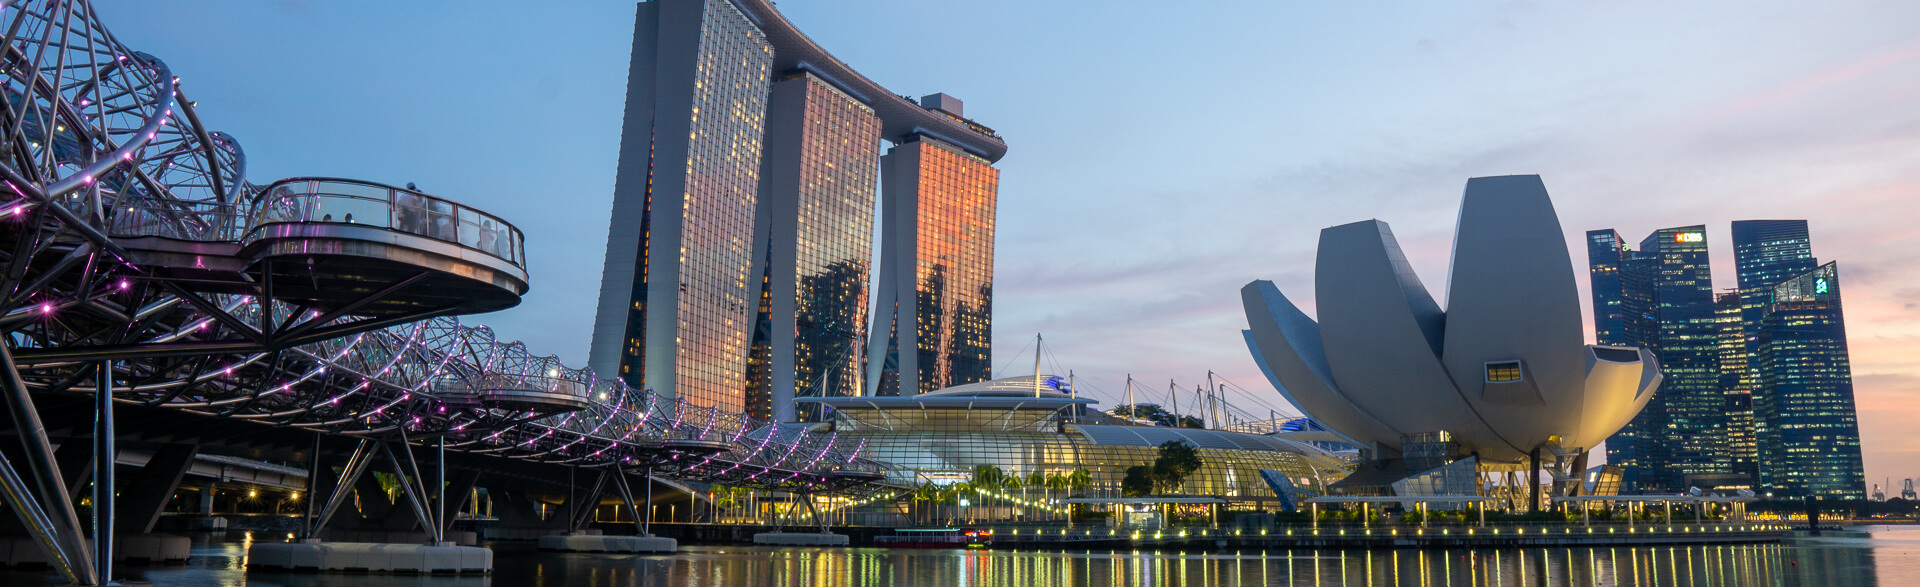 35 Best Things to do in Singapore – Ultimate 2022 Guide